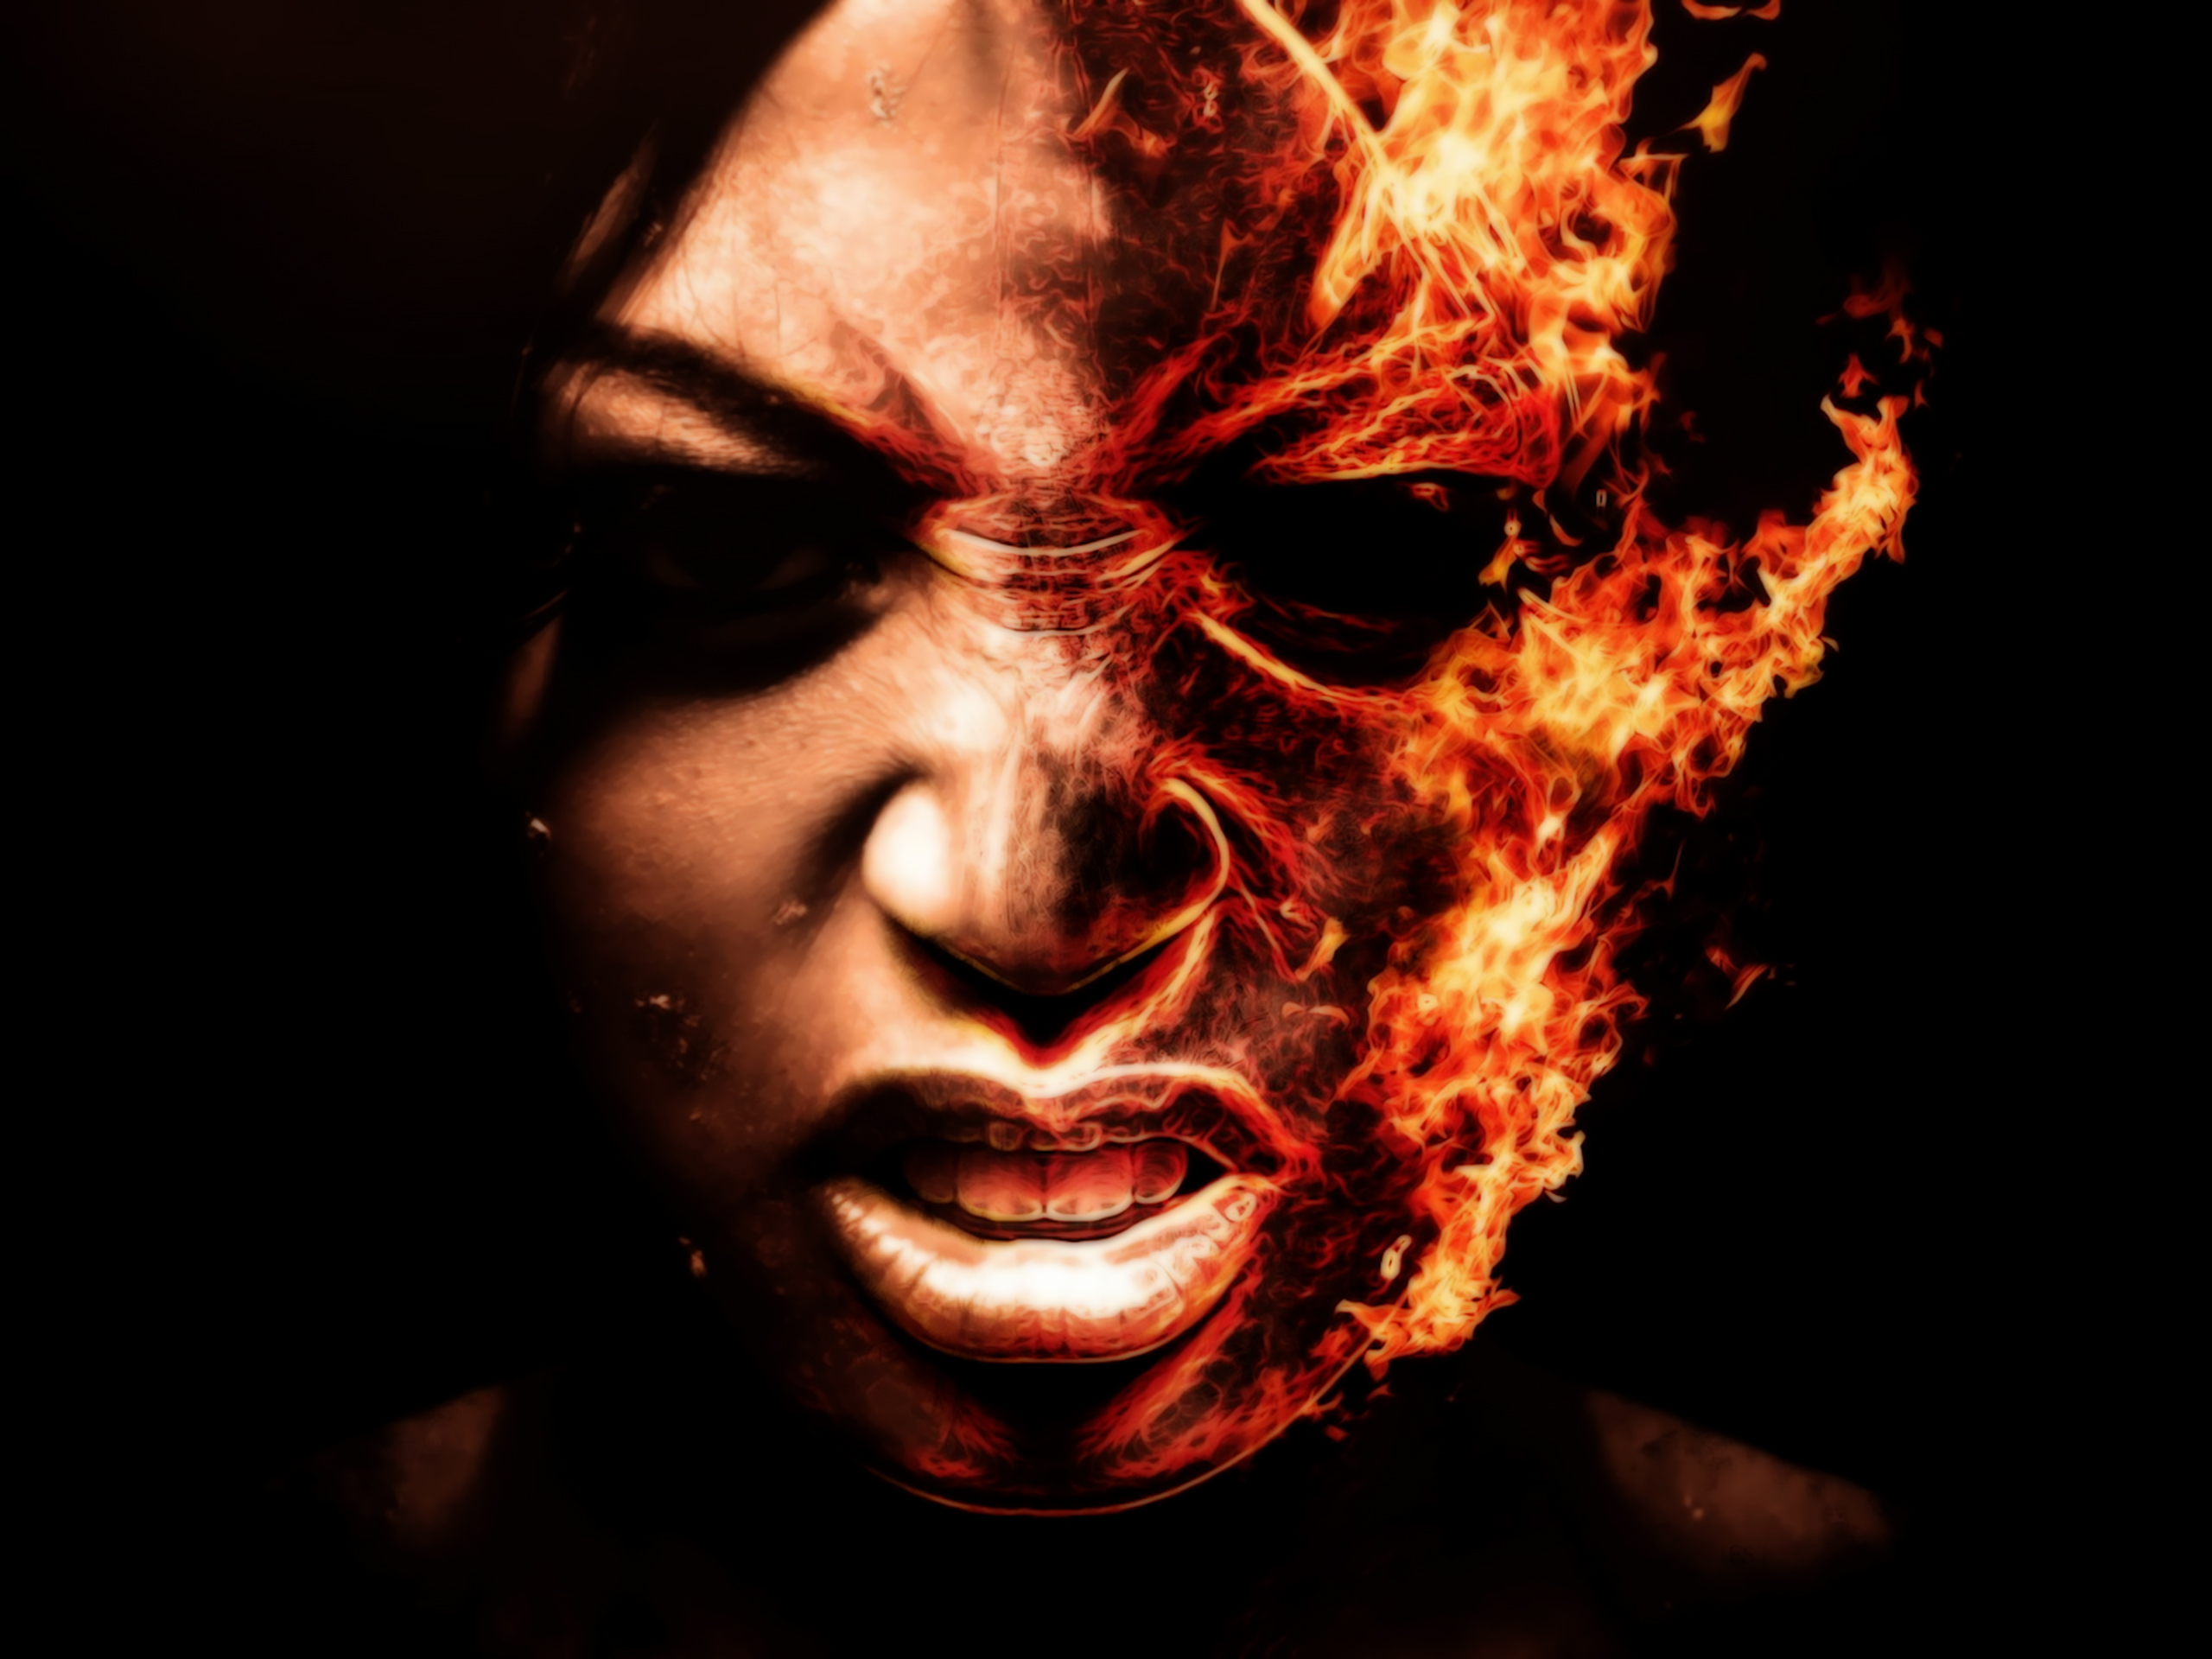 But What About A Faceof Fire - Horror Woman Face Background - HD Wallpaper 